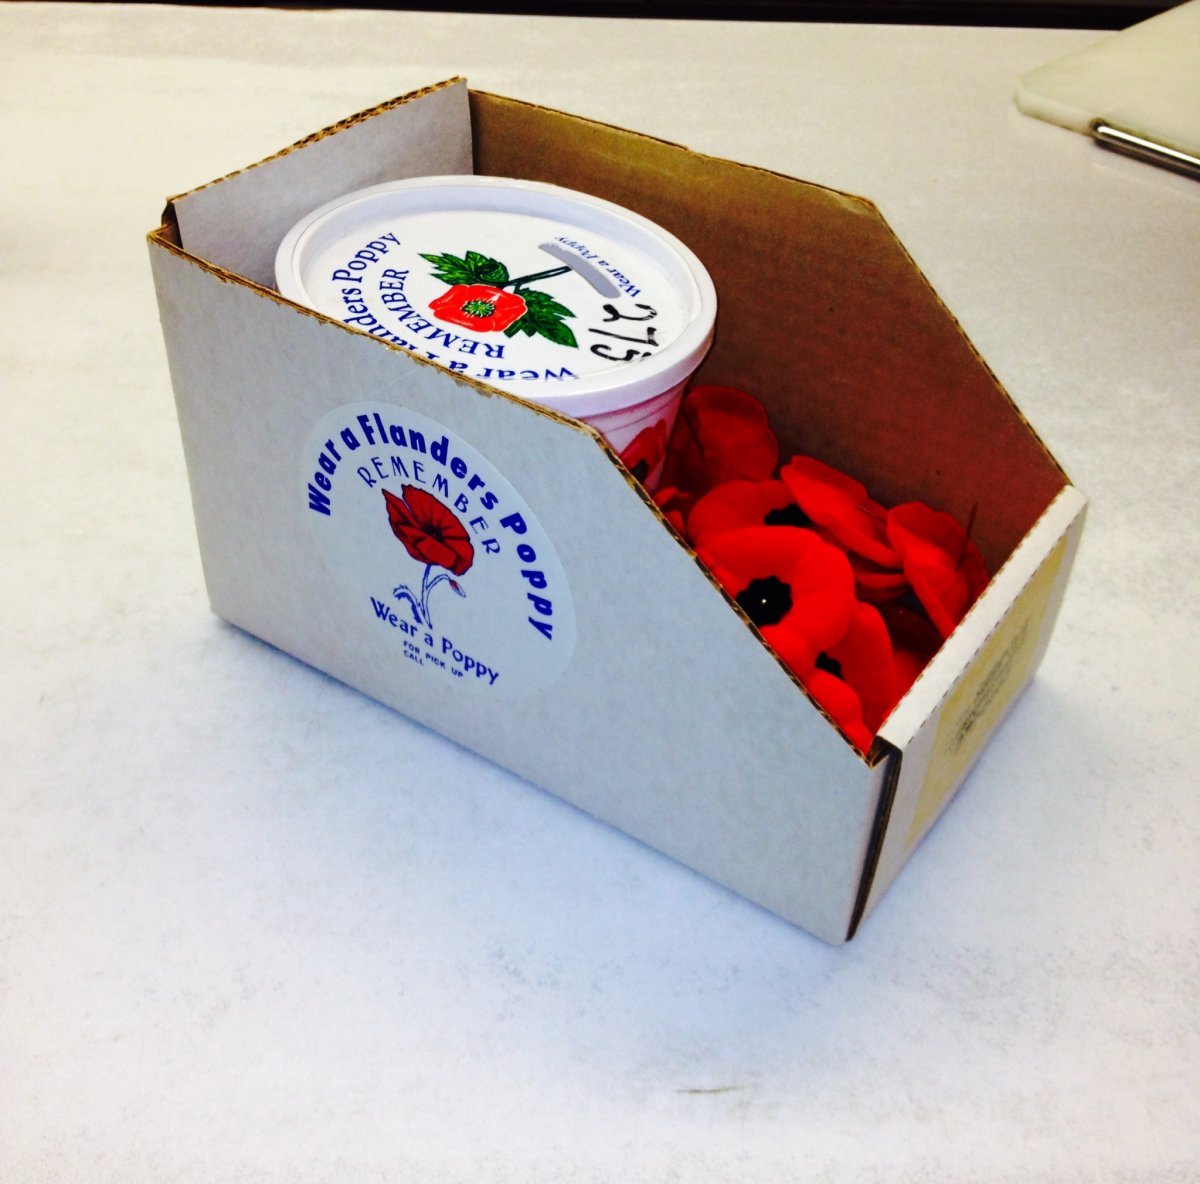 FILE: A Poppy Box is pictured.